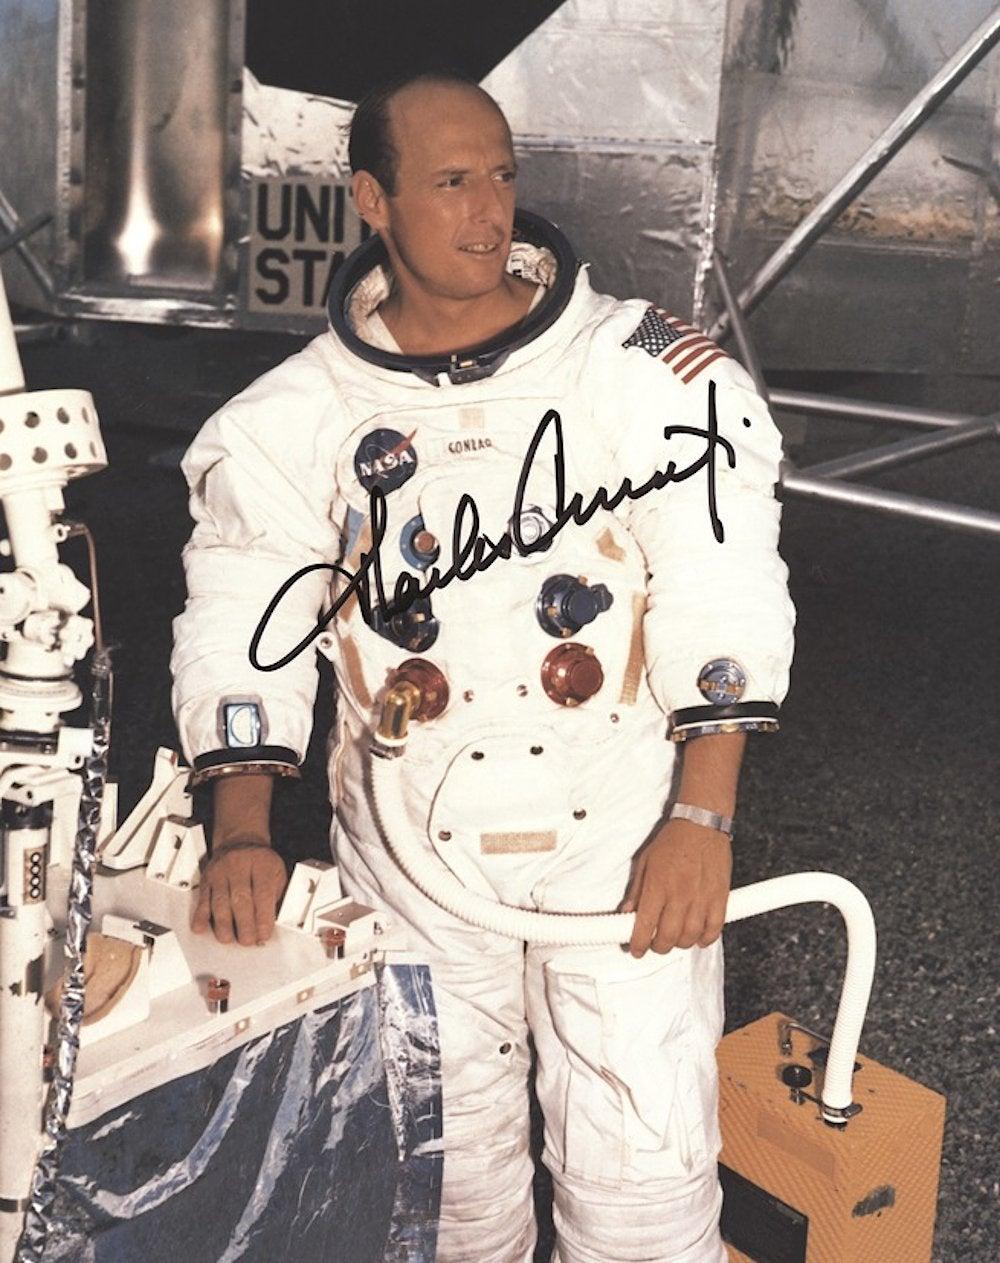 A signed photograph of Apollo 12 astronaut Pete Conrad, the third man on the moon

Charles 